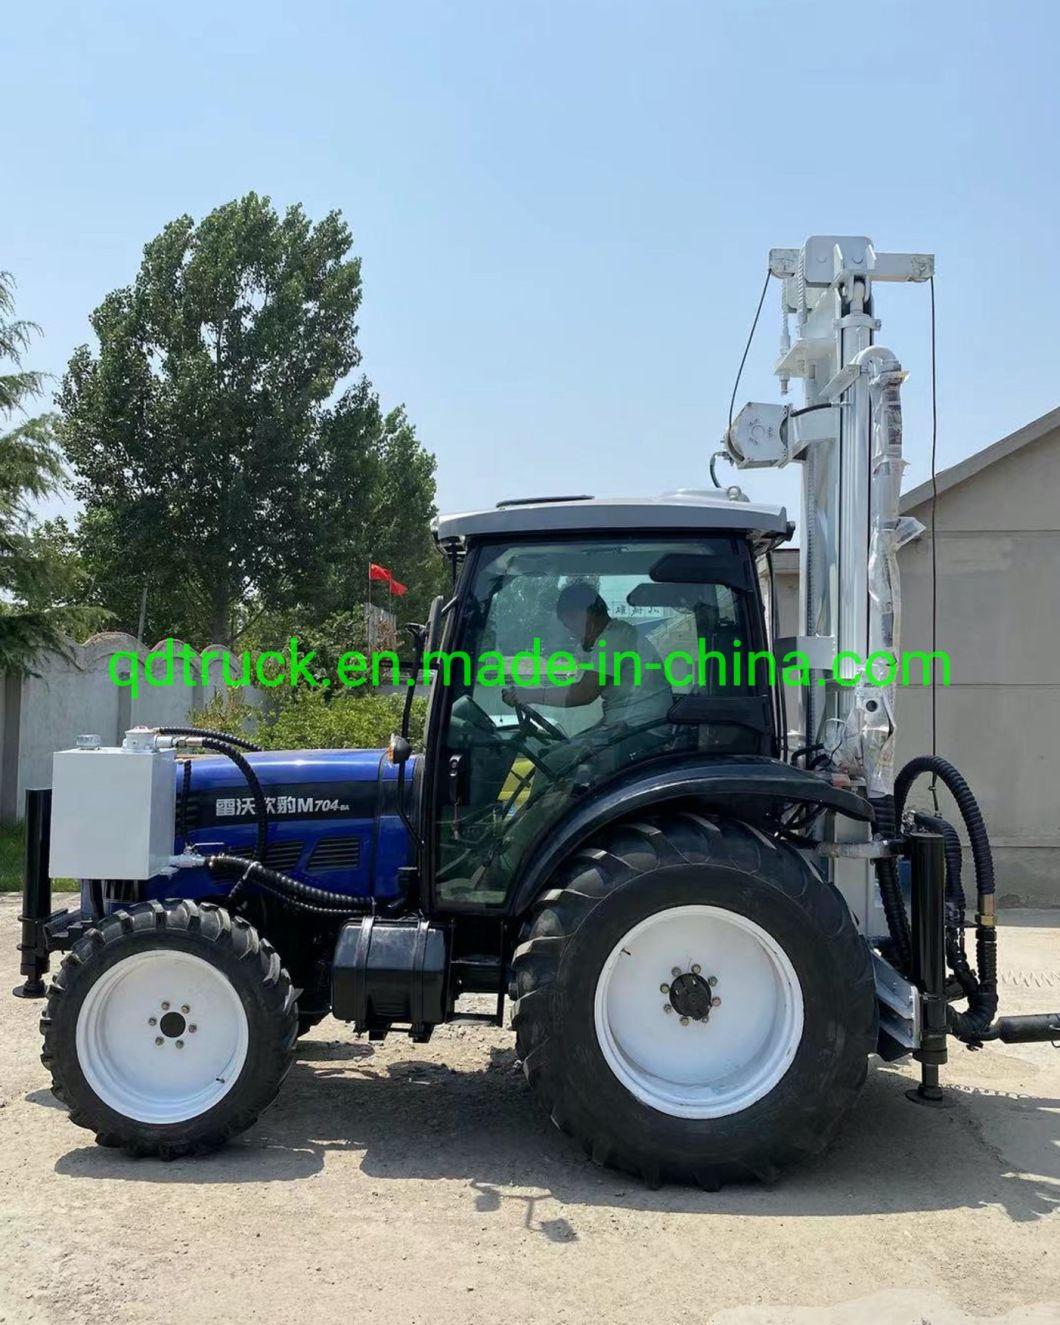 Tow air compressor tractor mounted water well impactor drilling rig